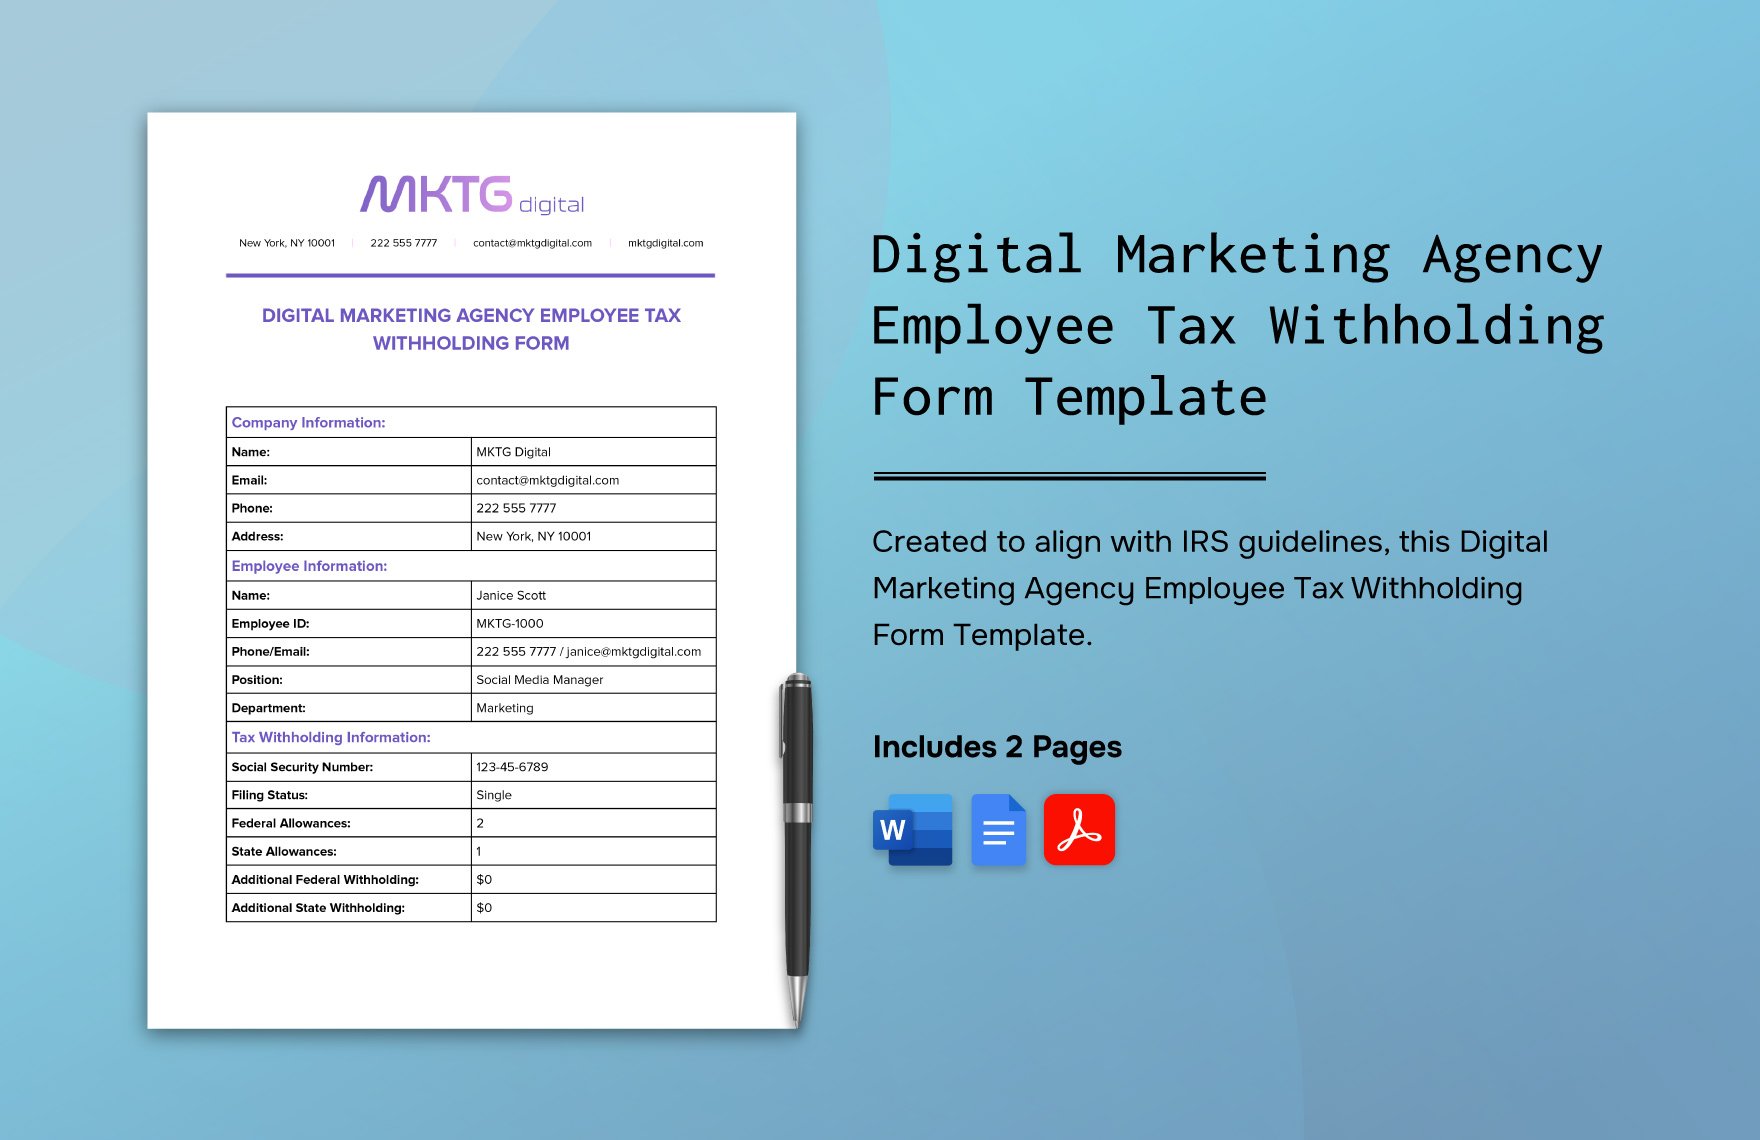 Digital Marketing Agency Employee Tax Withholding Form Template